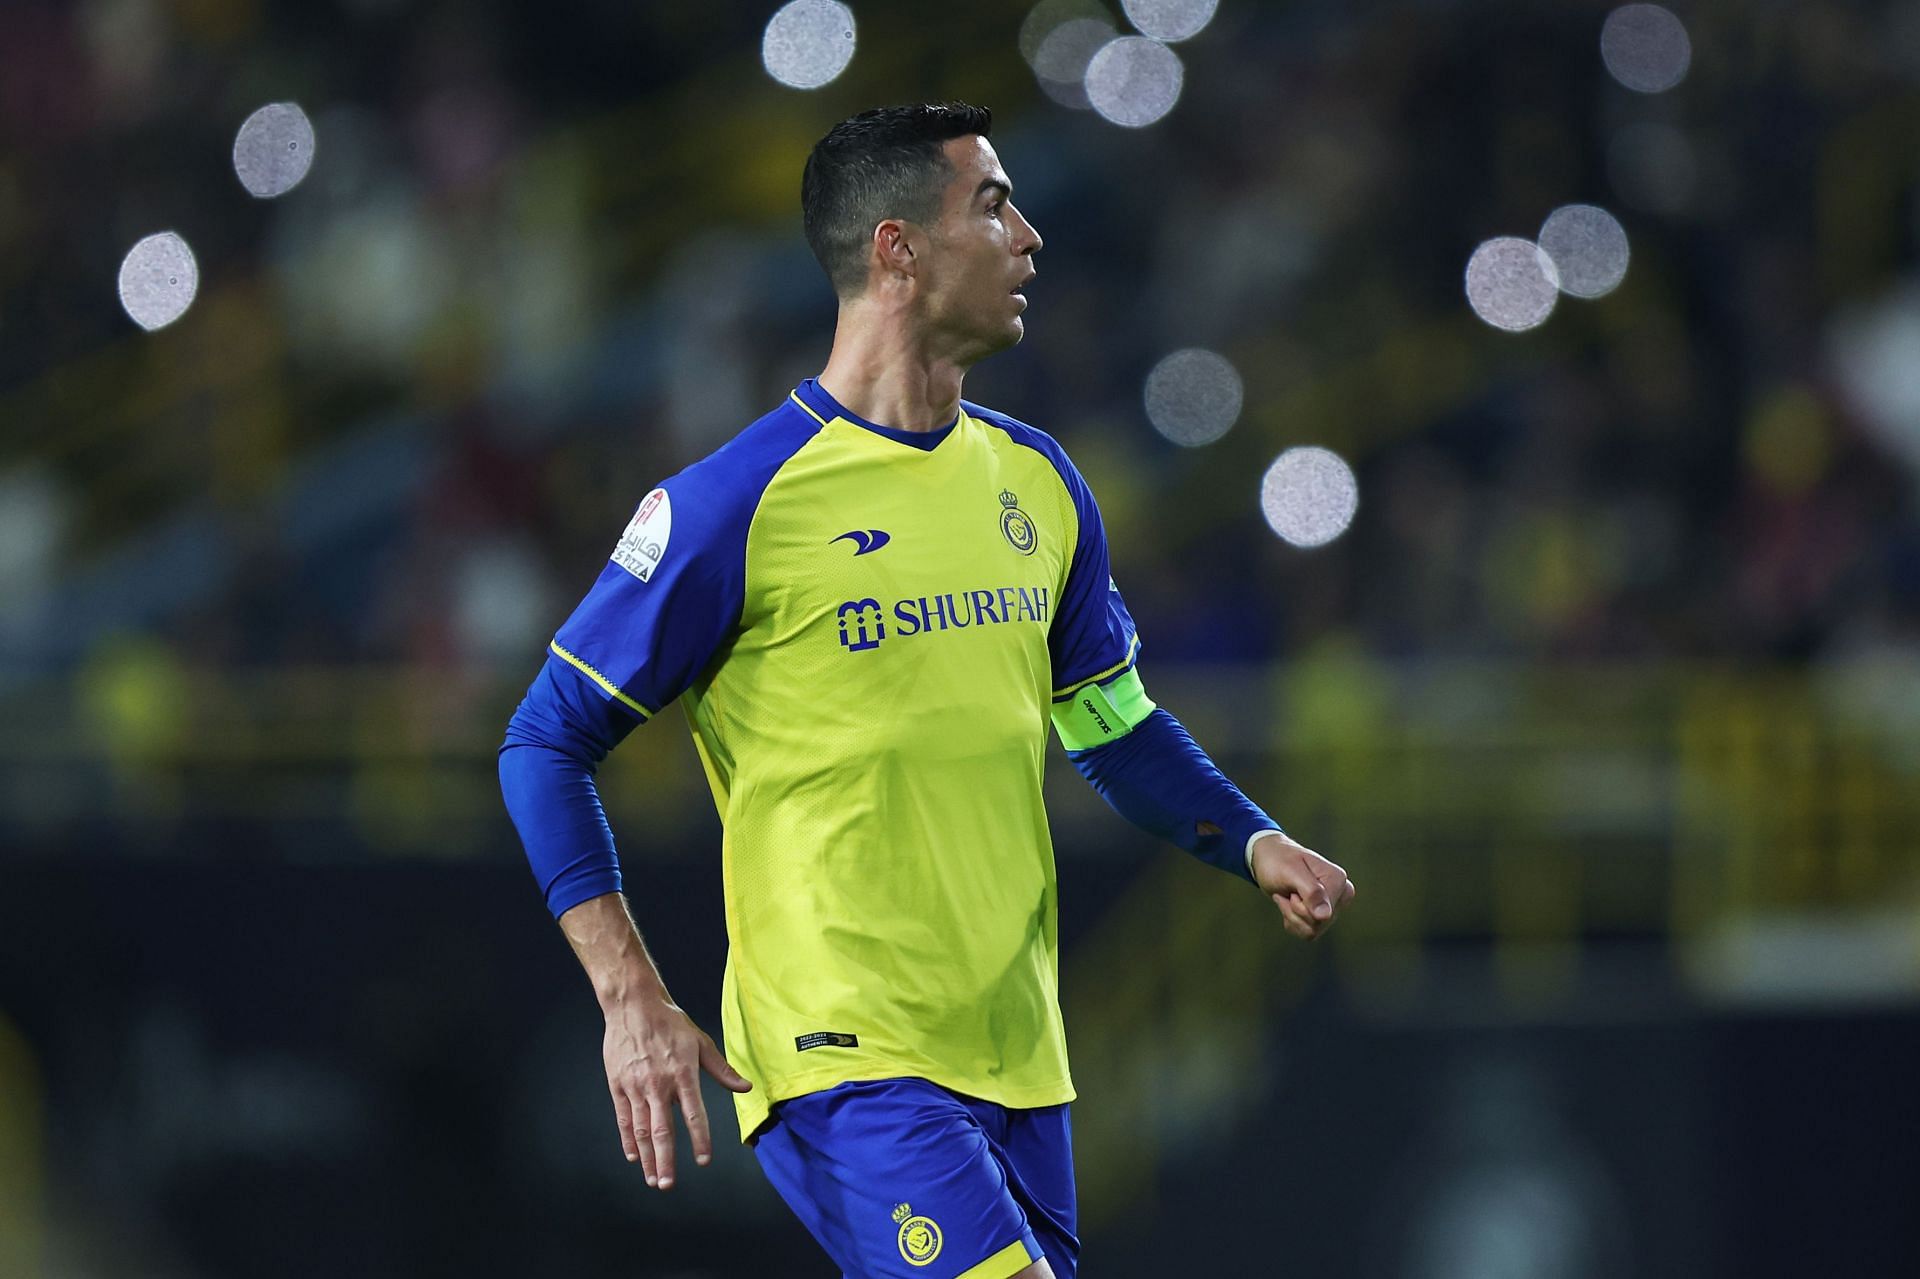 Is Cristiano Ronaldo playing for Al-Nassr against Al-Batin today?